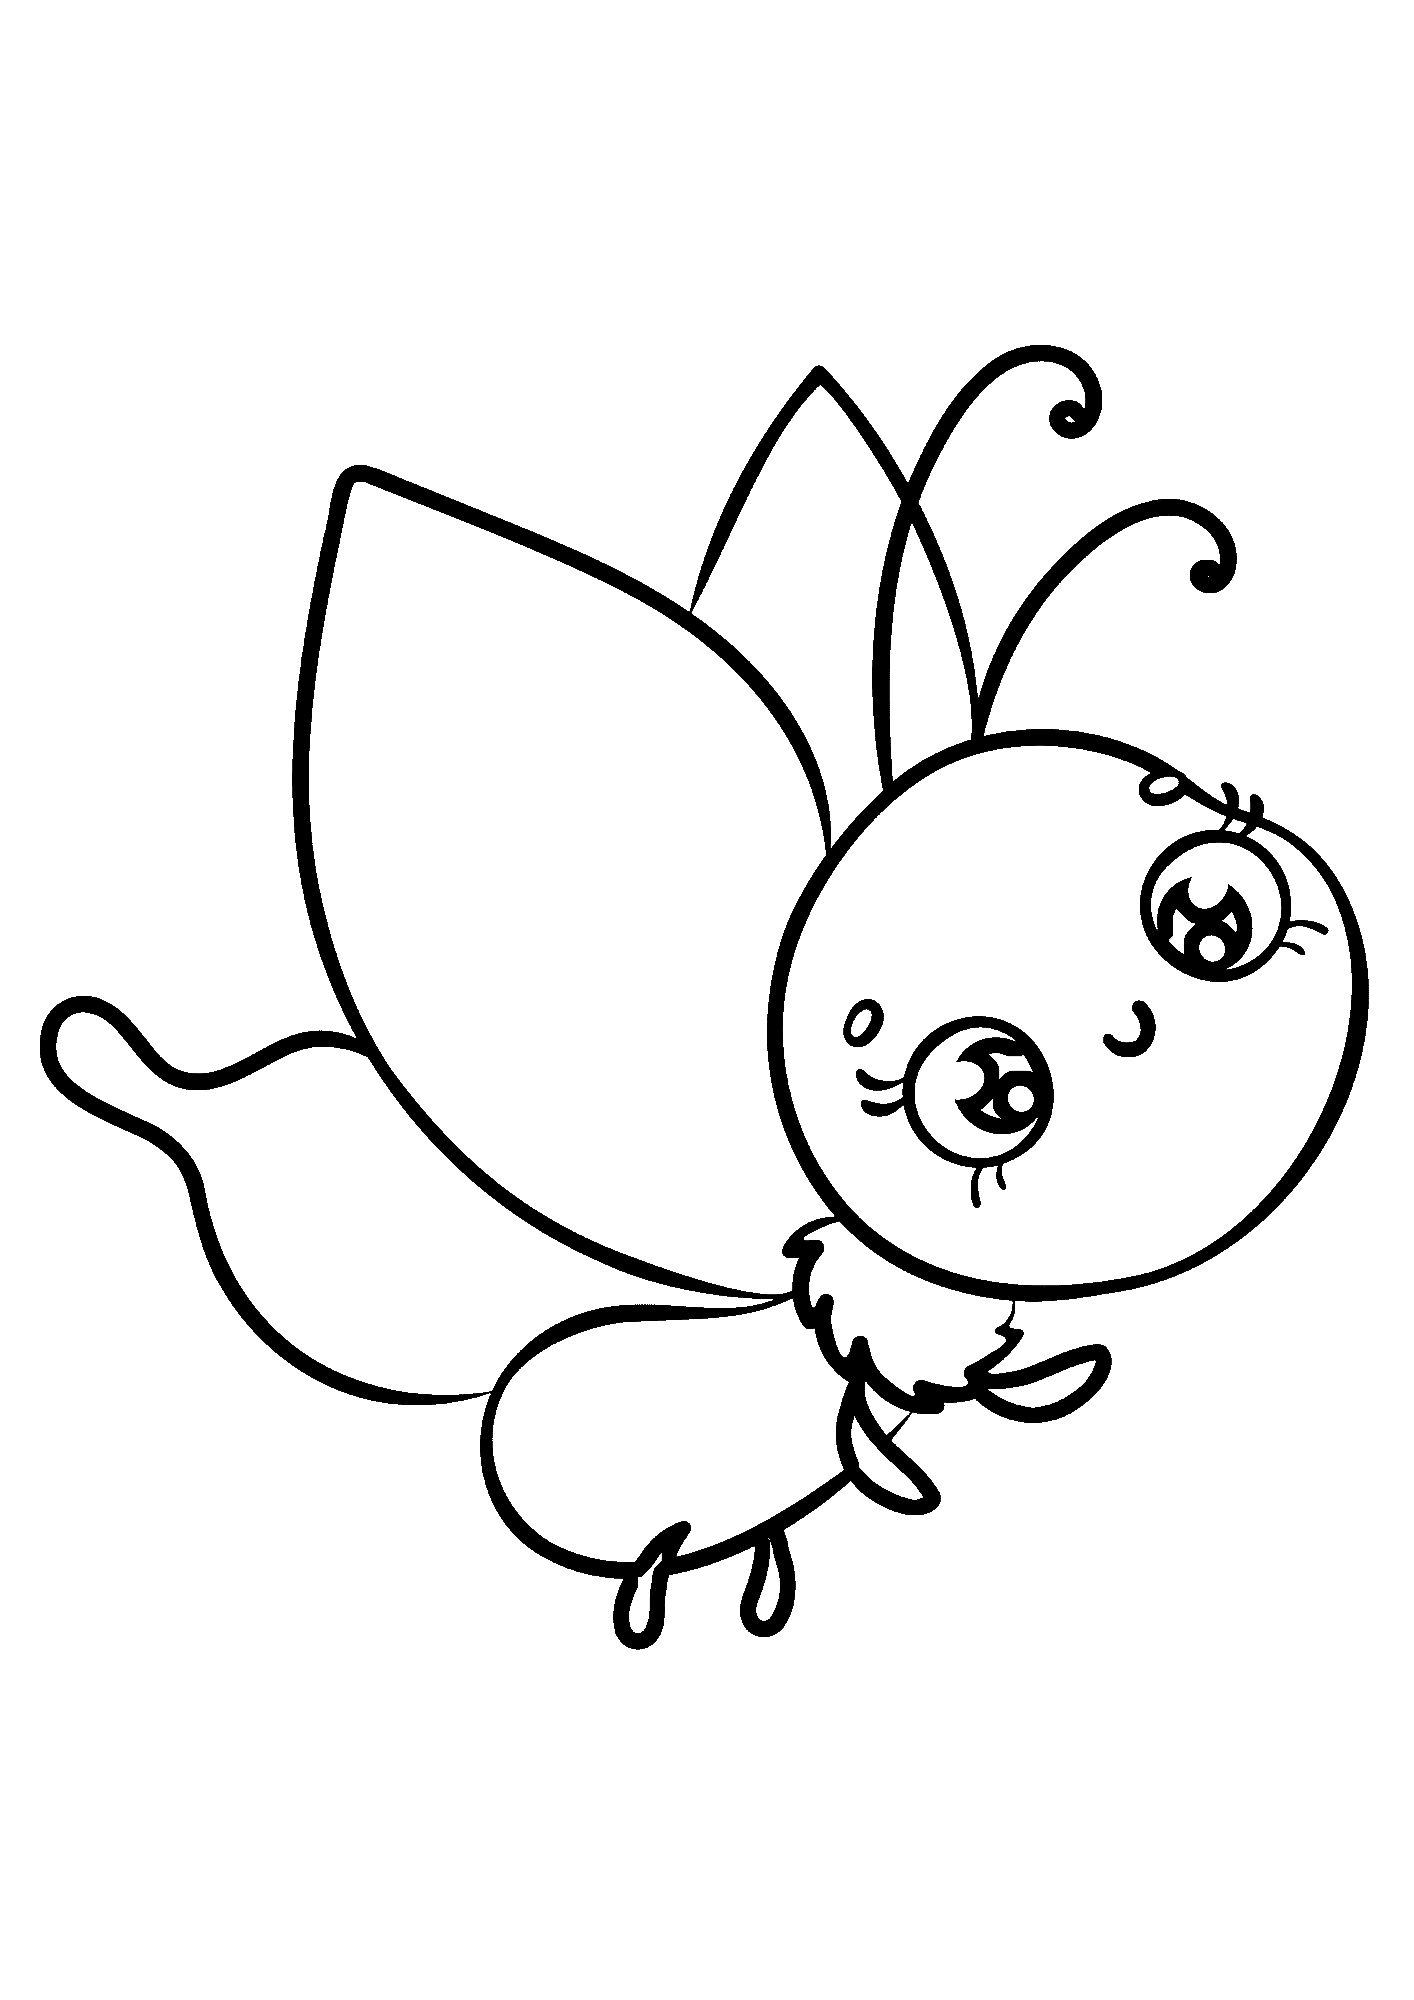 Free Butterfly Coloring Pages